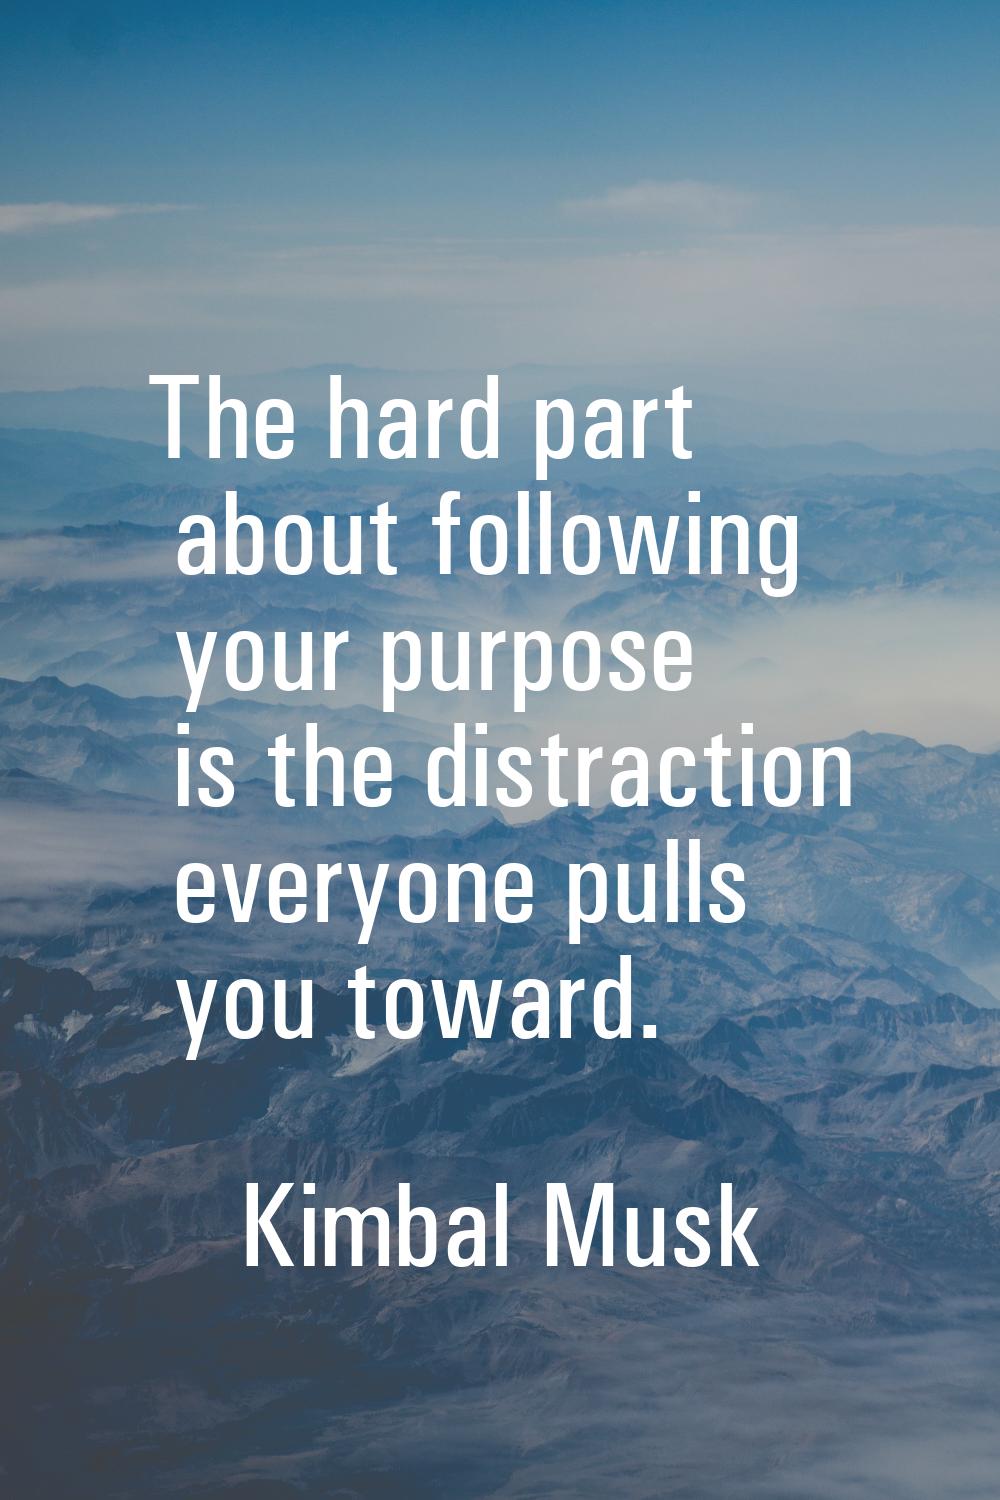 The hard part about following your purpose is the distraction everyone pulls you toward.